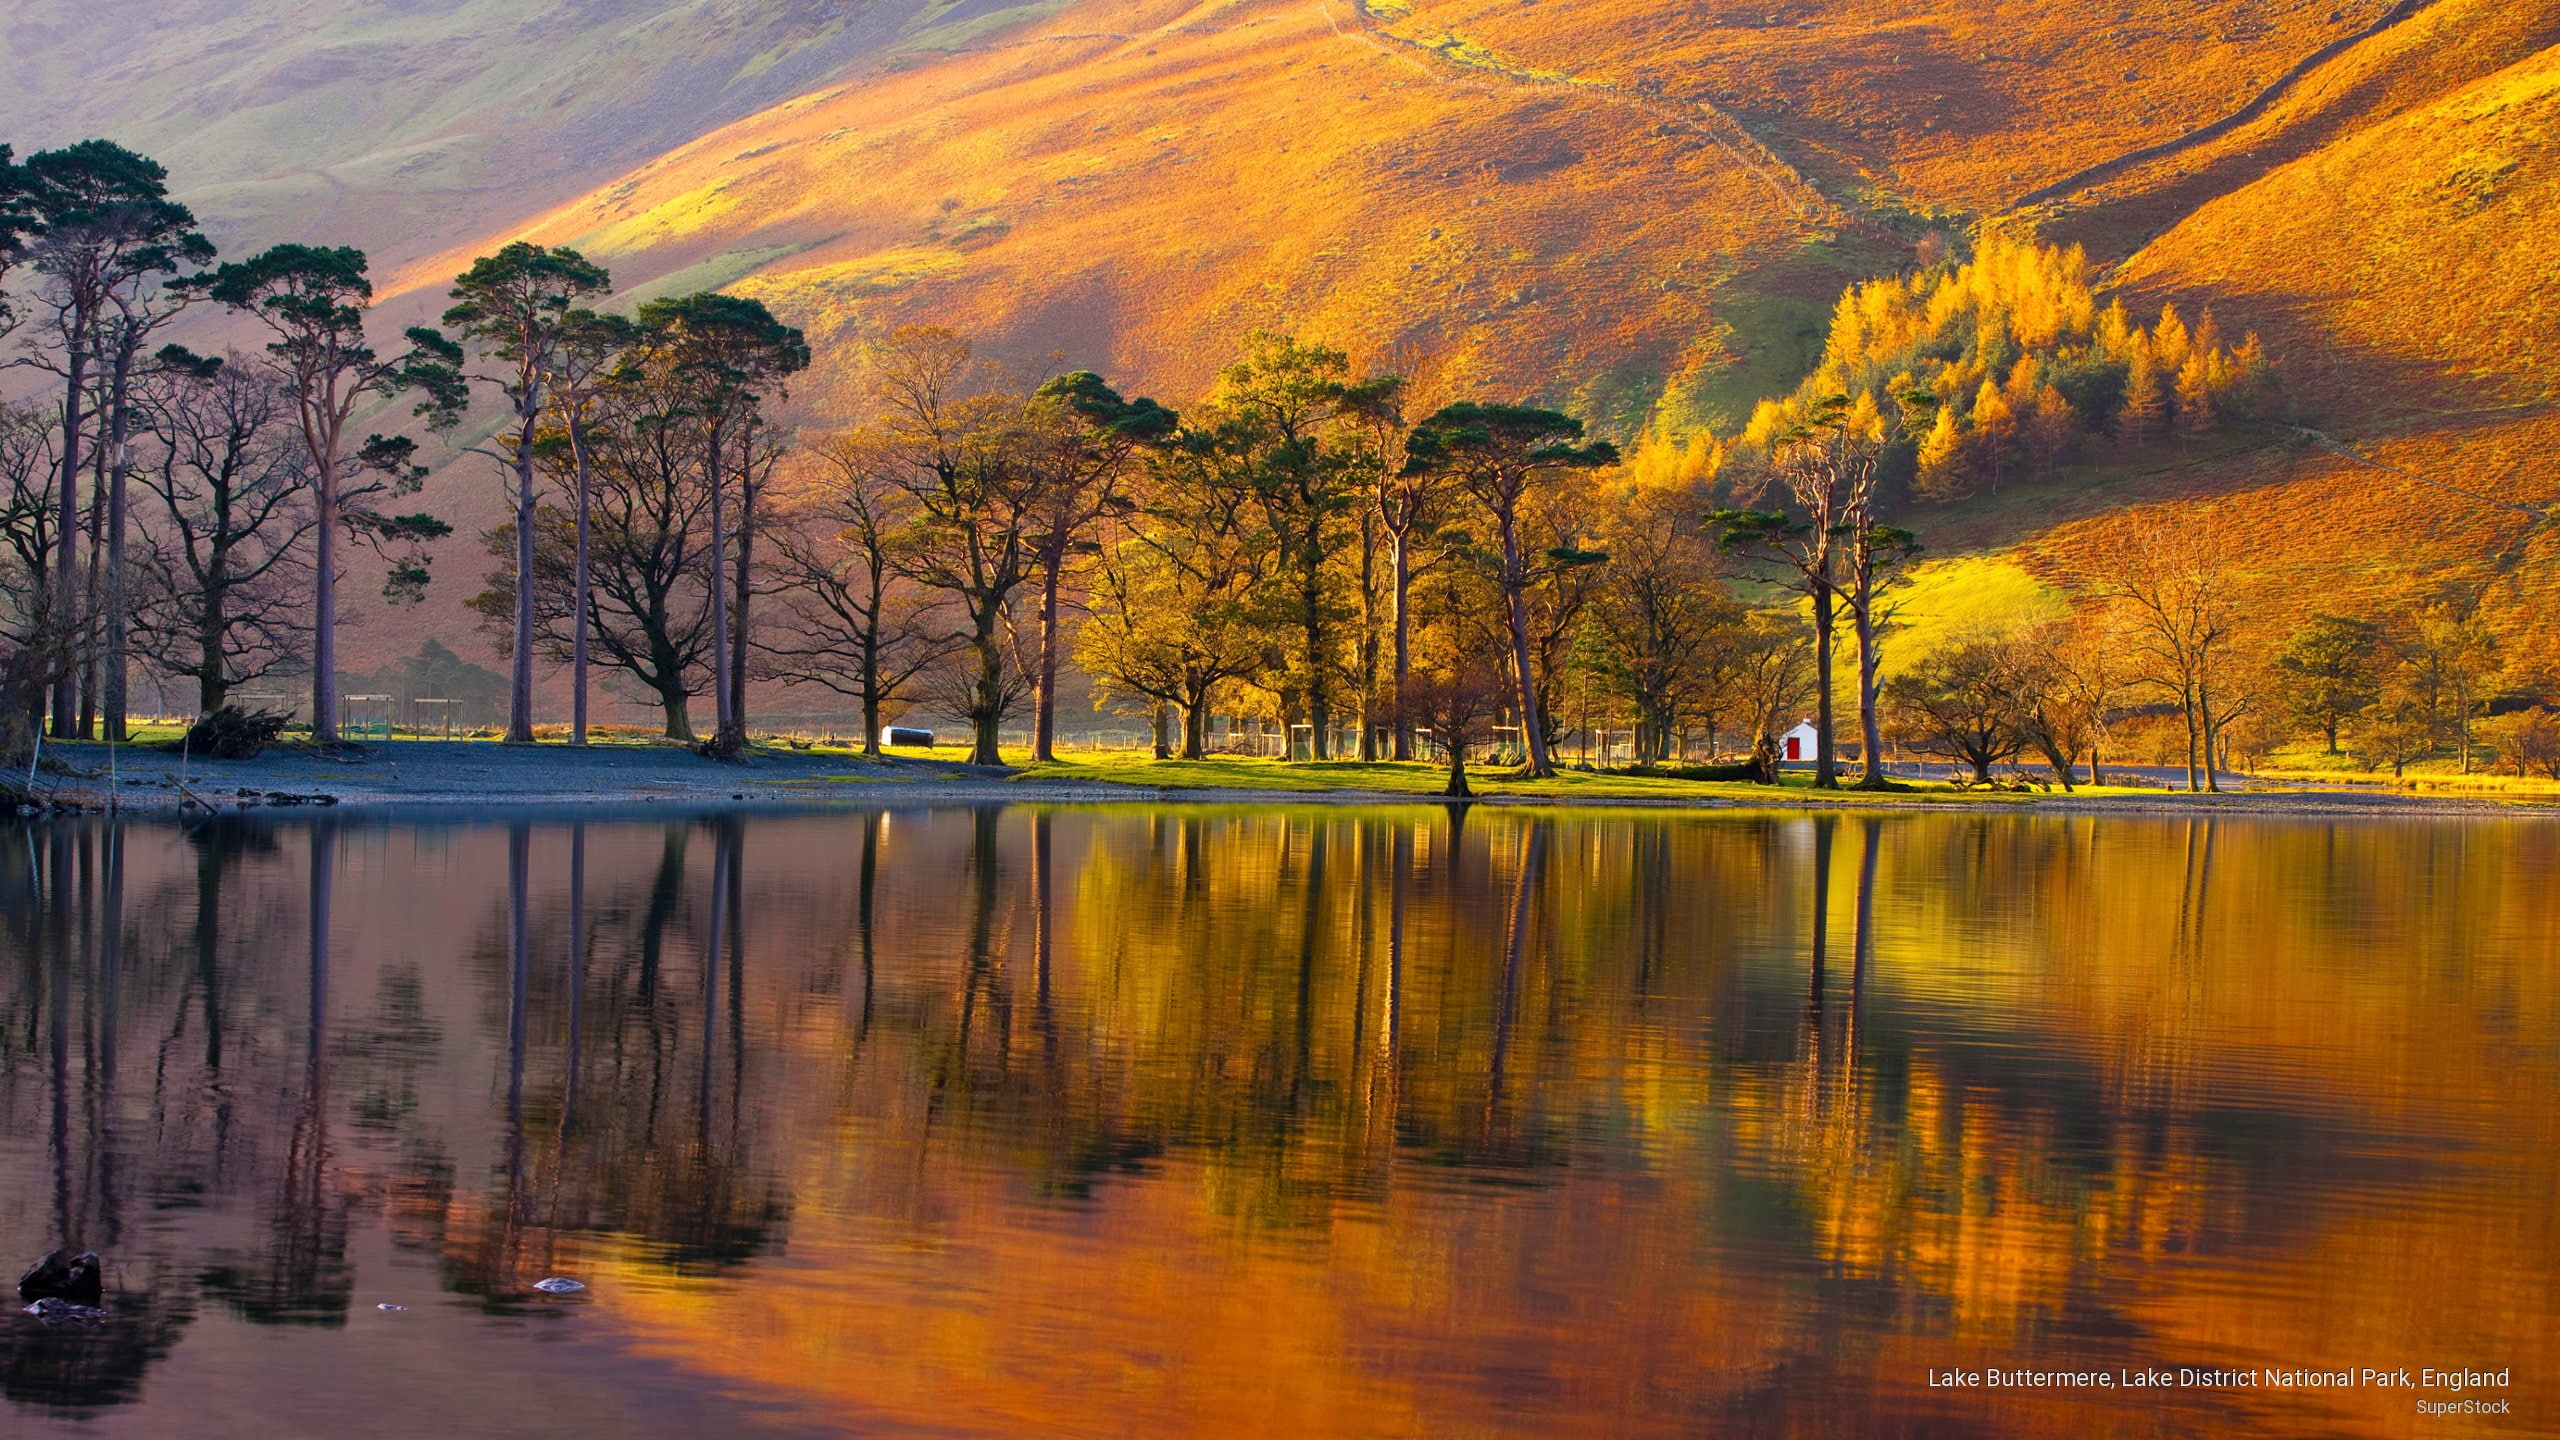 Lake Buttermere, Lake District National Park, England, Fall